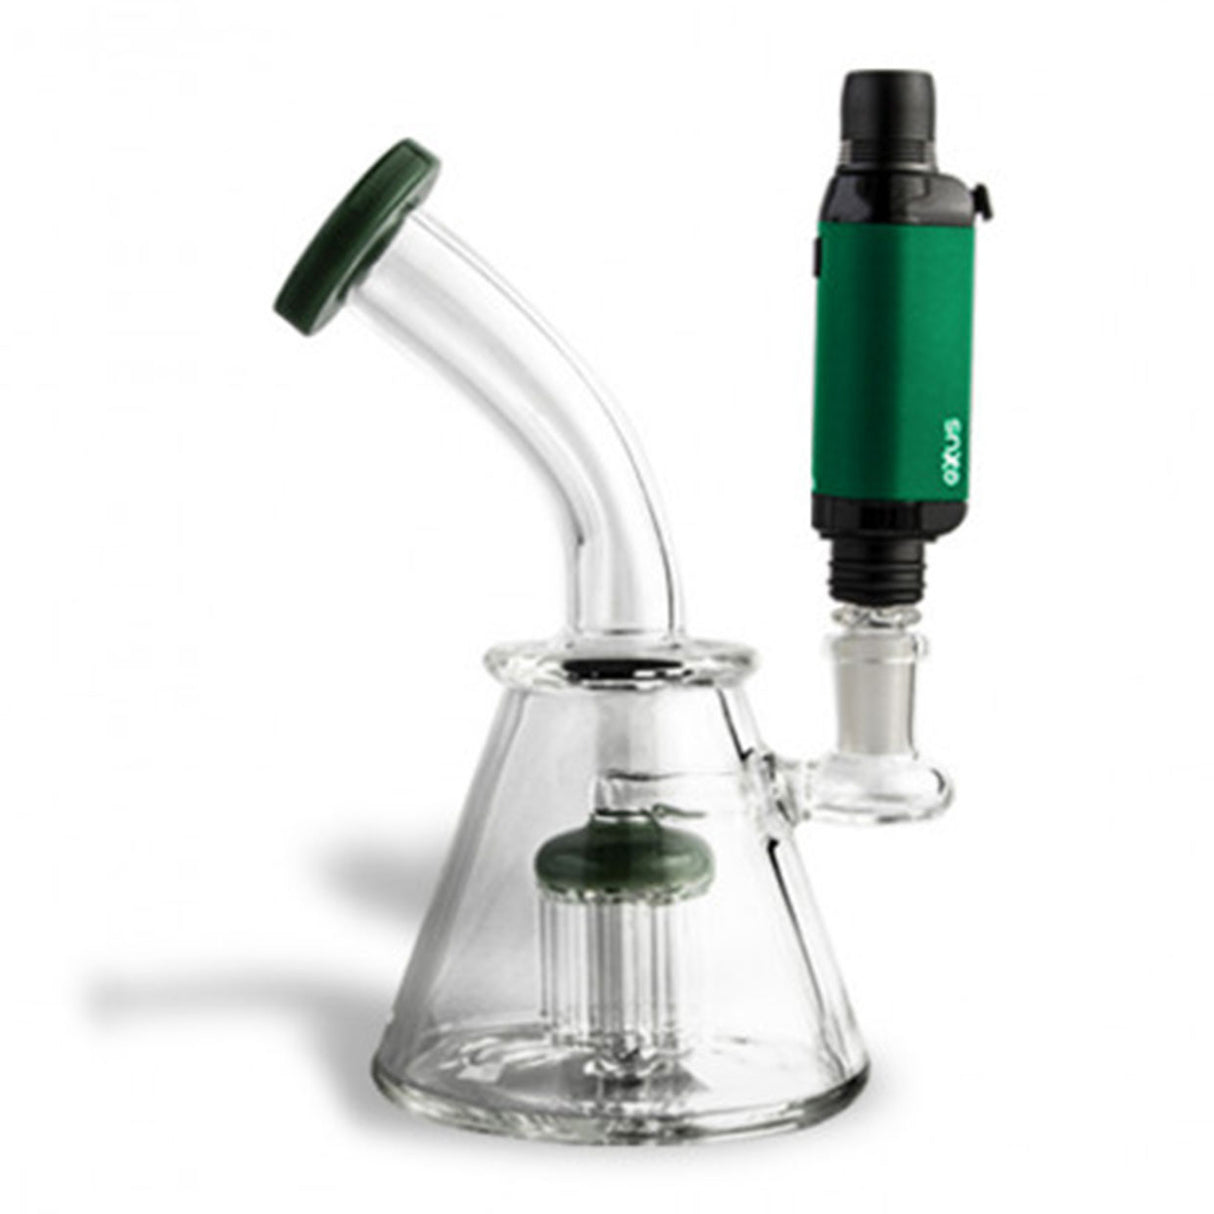 Green Exxus VRS Vaporizer Kit with Nectar Collector Mode, Dab Rig Mode, Cartridge Mode Comes with carrying pouch 6